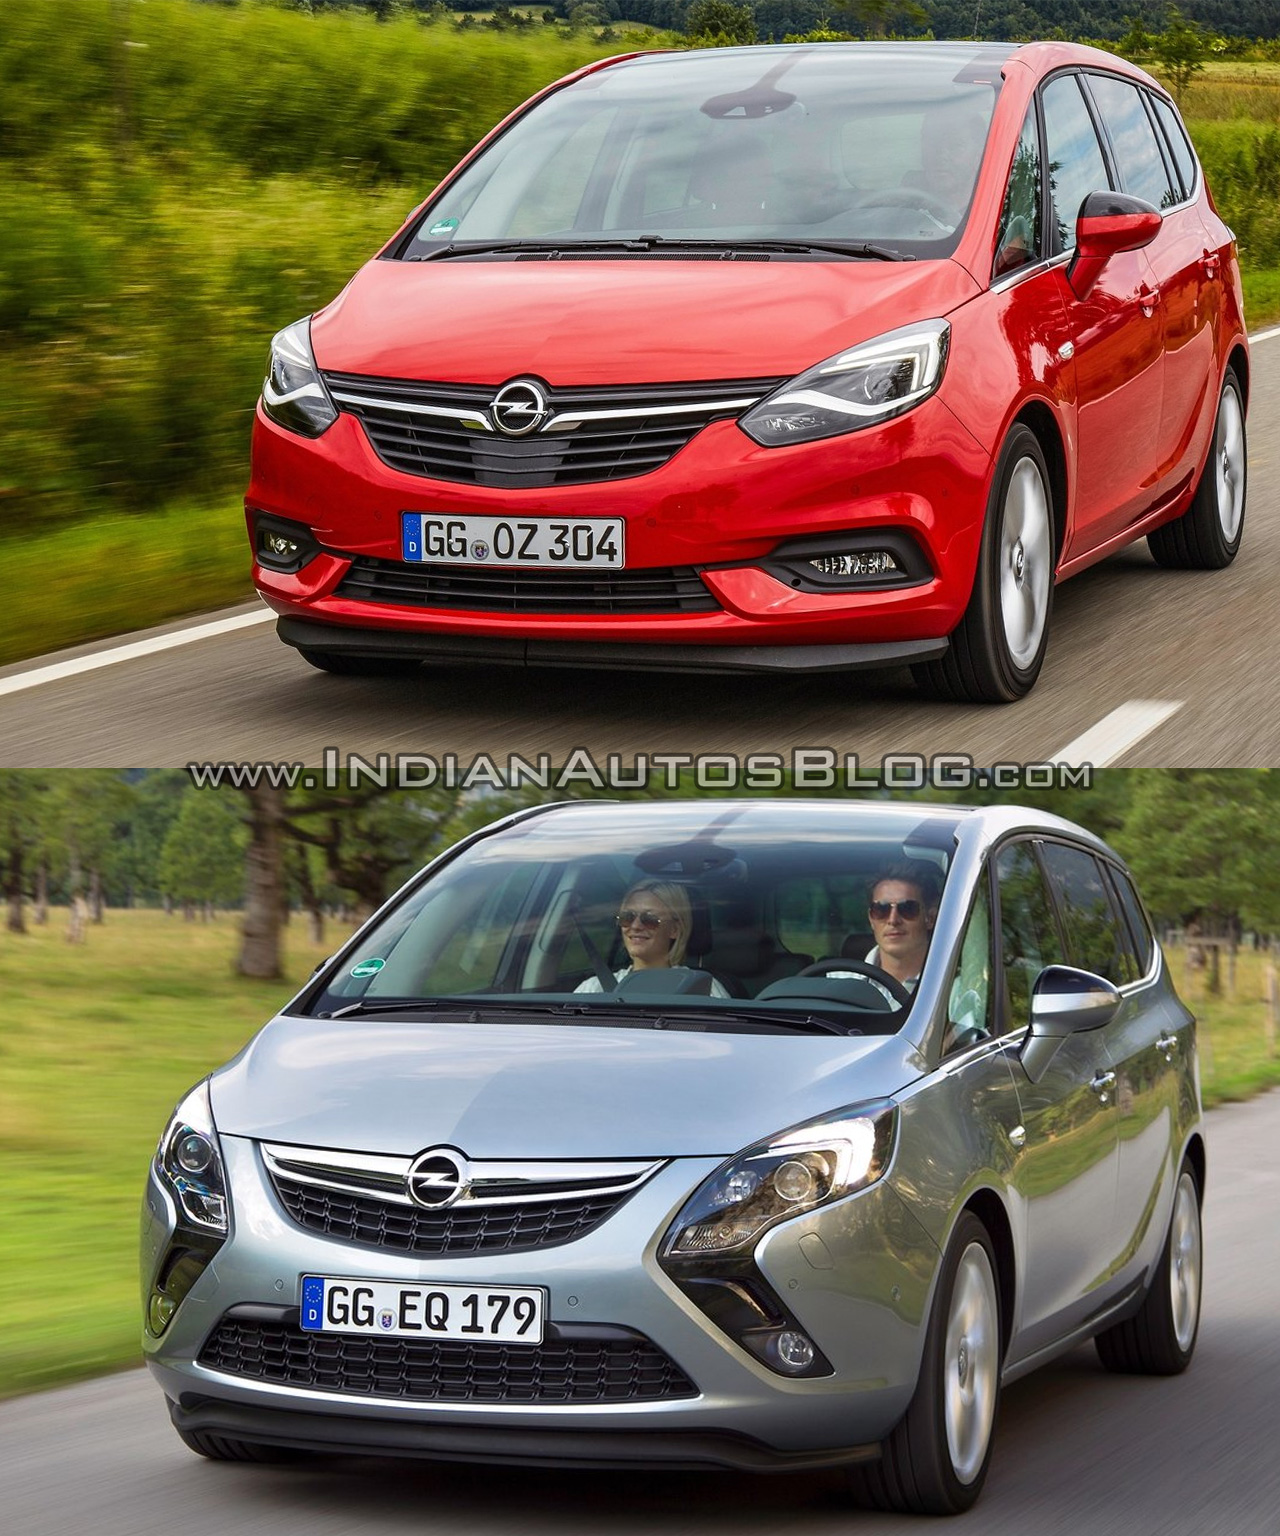 GM will move Opel Zafira production to German plant